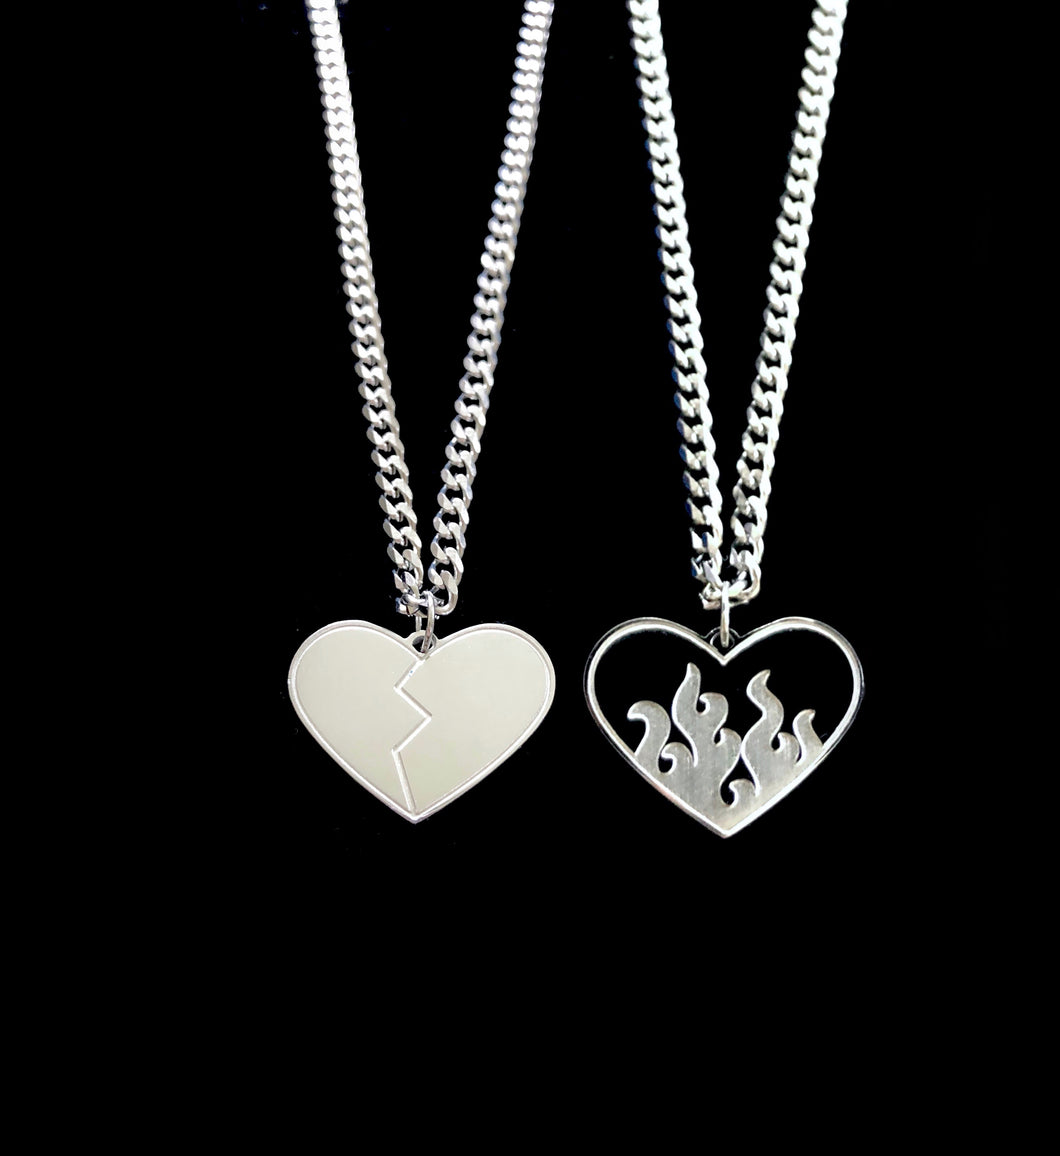 Love Hurts Necklace